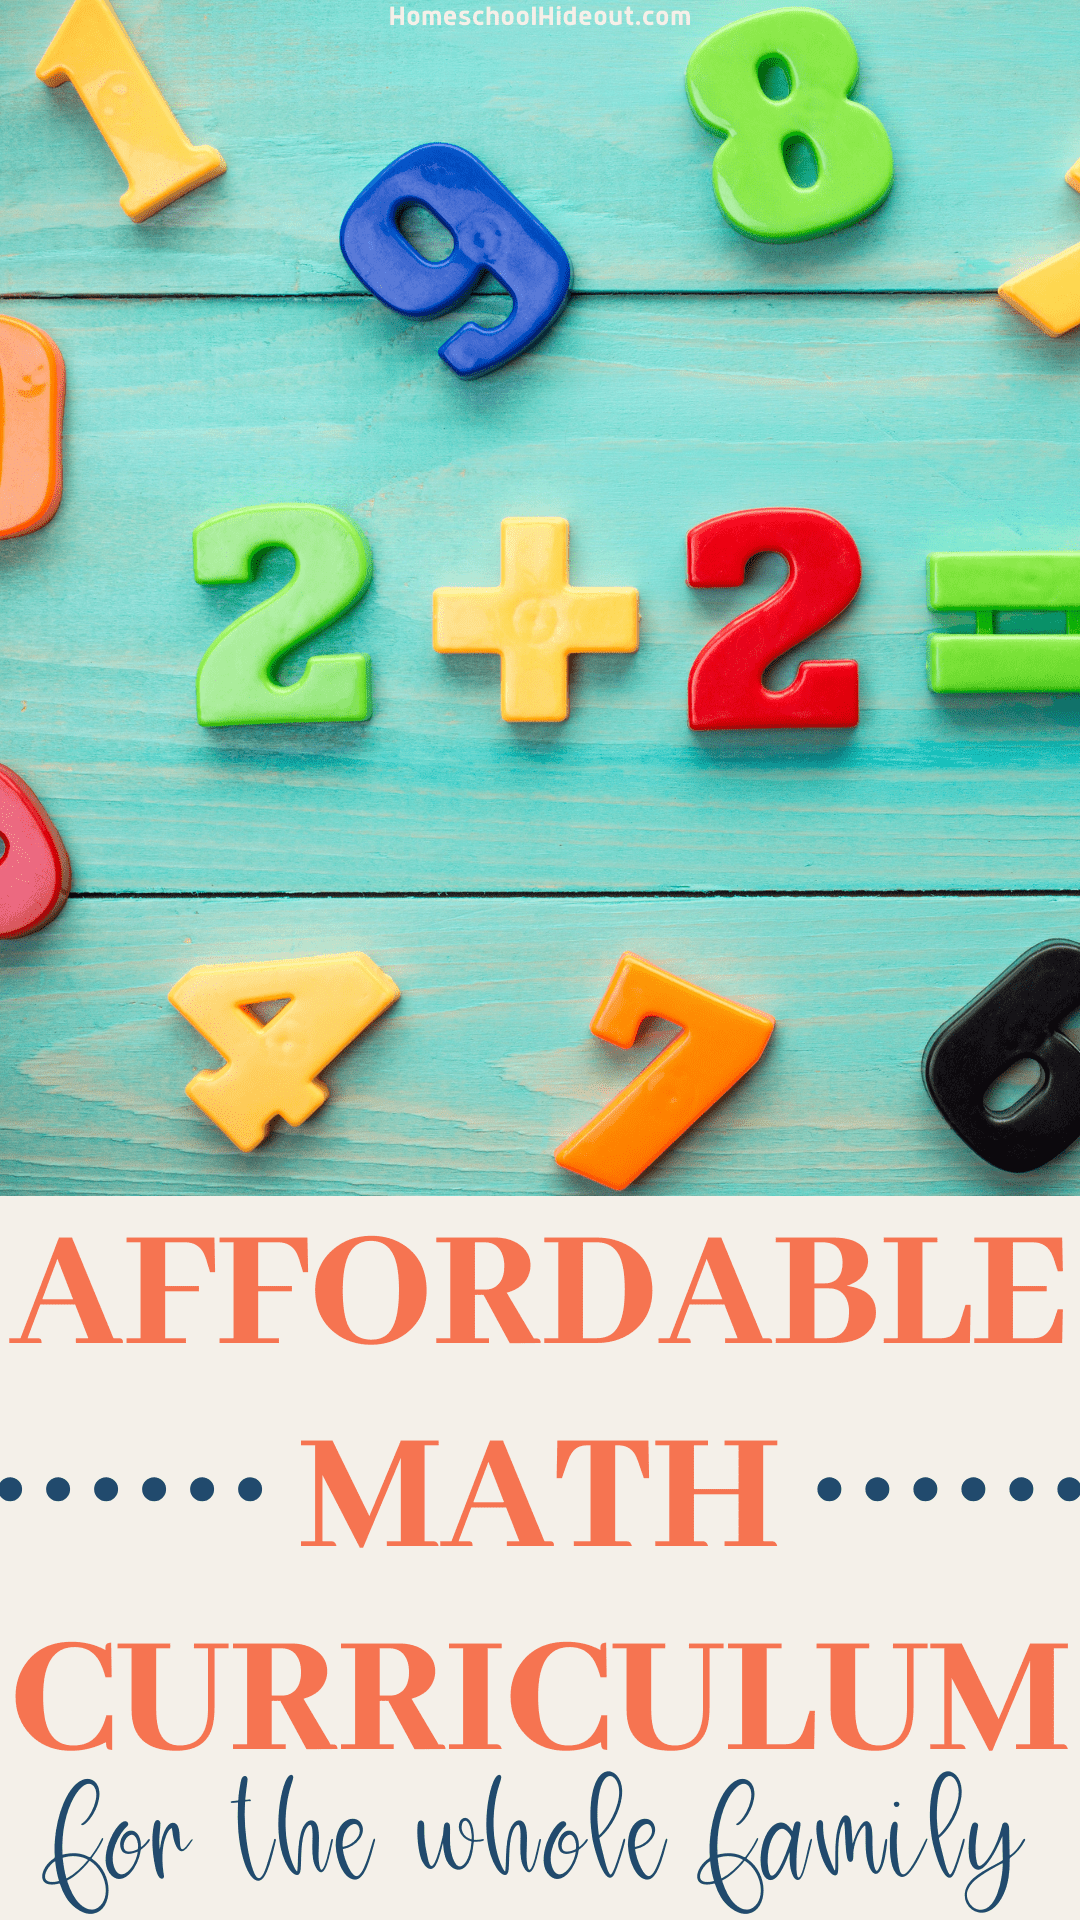 CTCMath is an easy-to-use K-12 math curriculum that has transformed our homeschool. This is a great deal on an awesome program! I'm using this coupon for next year, too!